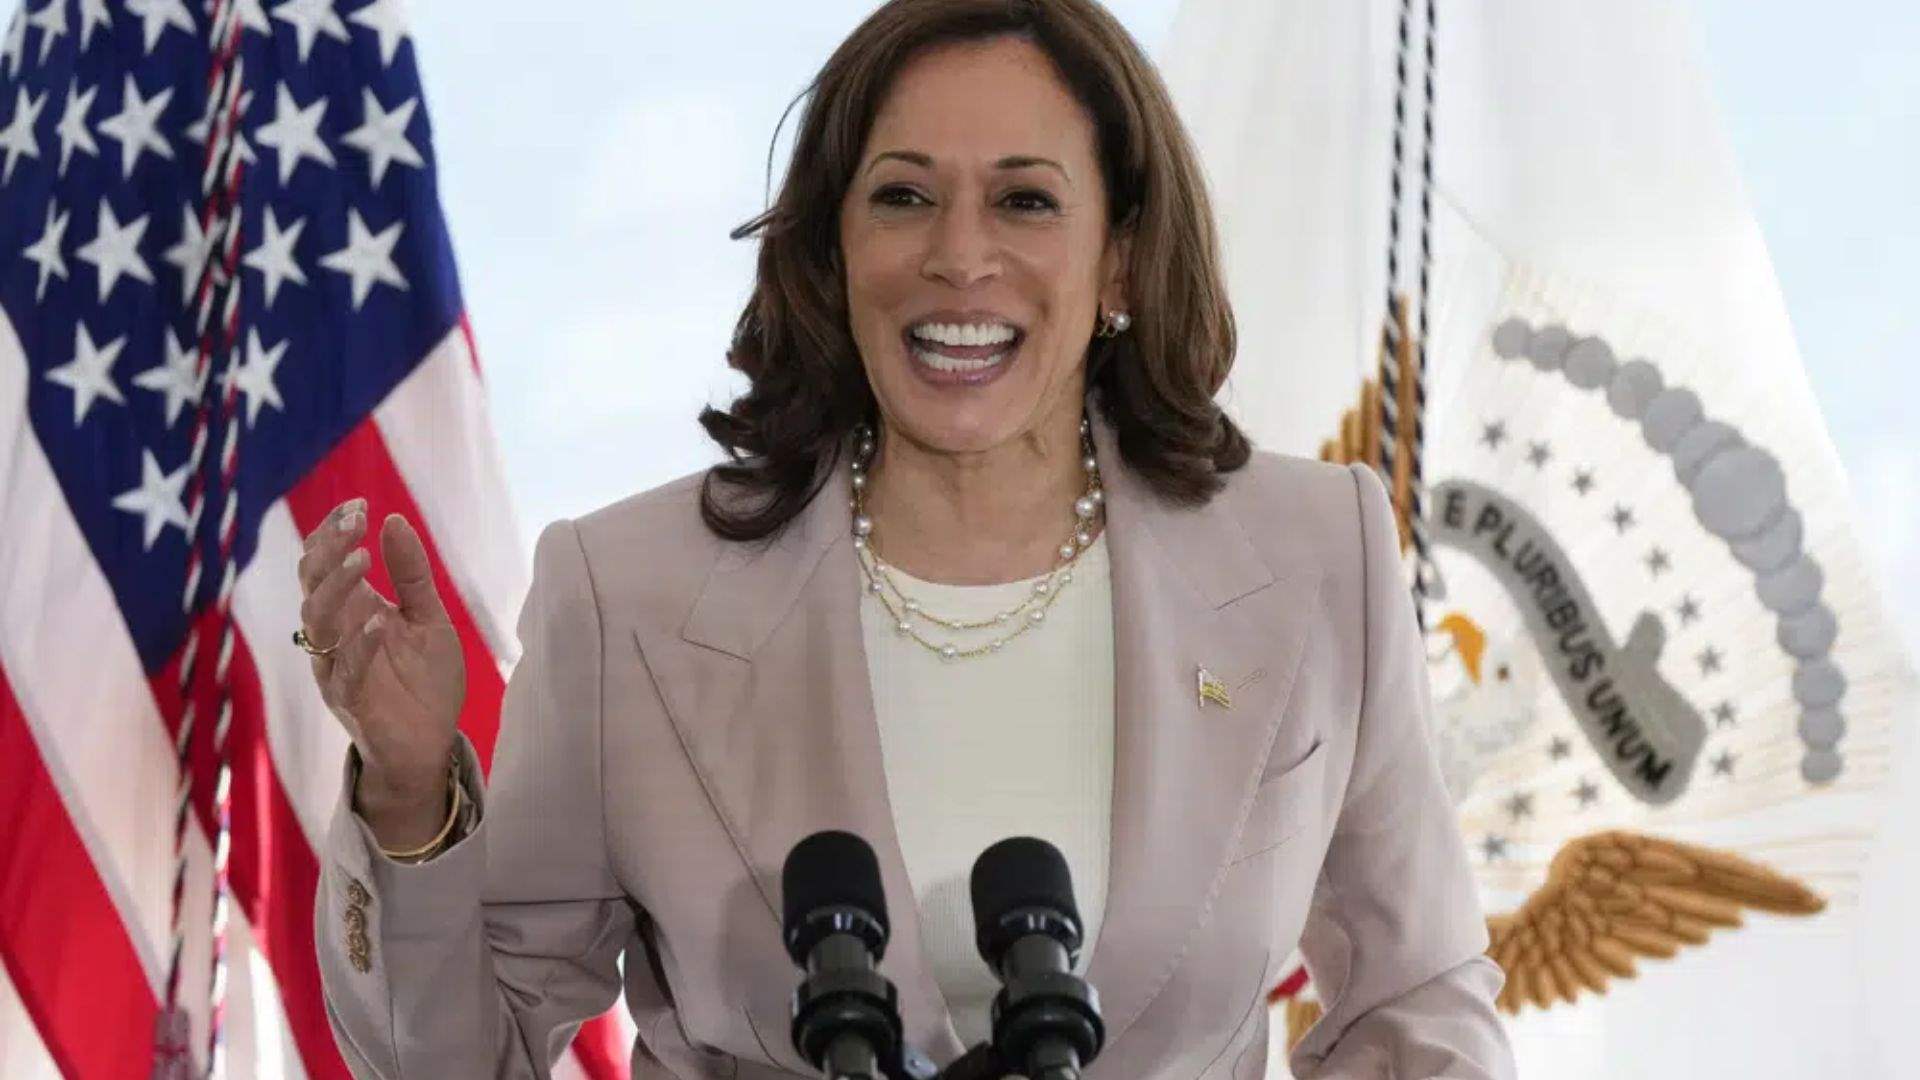 At West Point, Vice President Harris to make history as first woman to deliver commencement speech